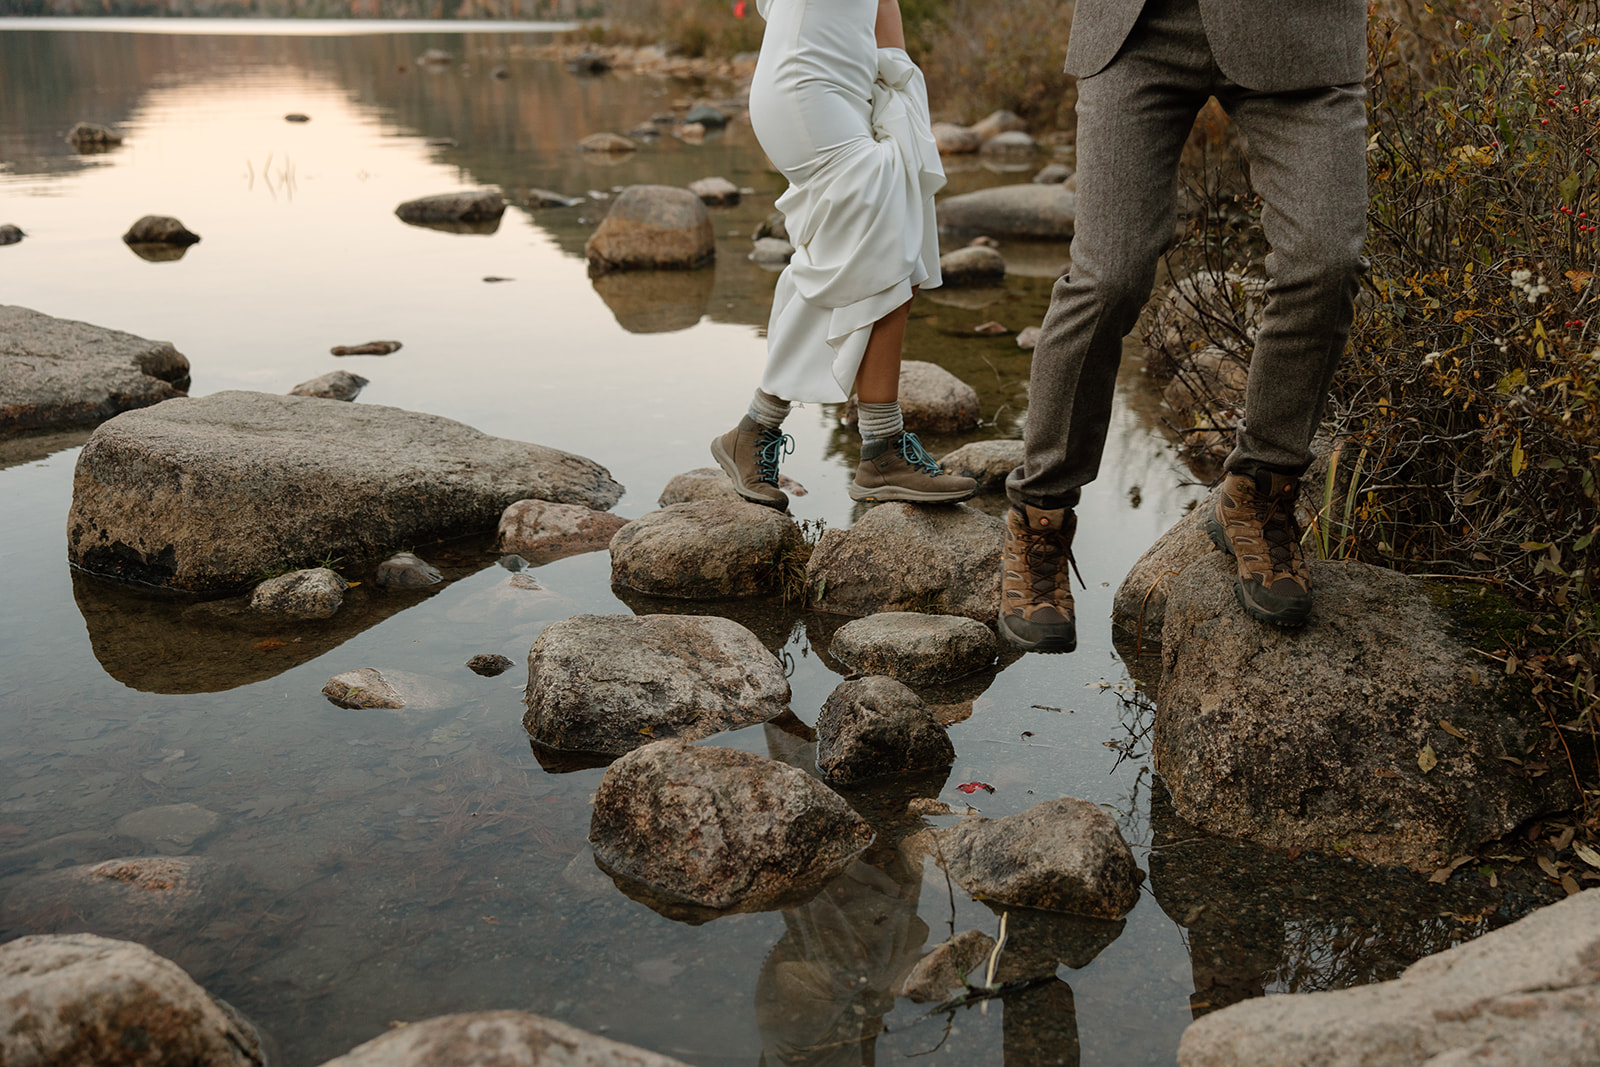 Jordan Pond elopement in the Fall. Acadia national park elopement and microwedding.